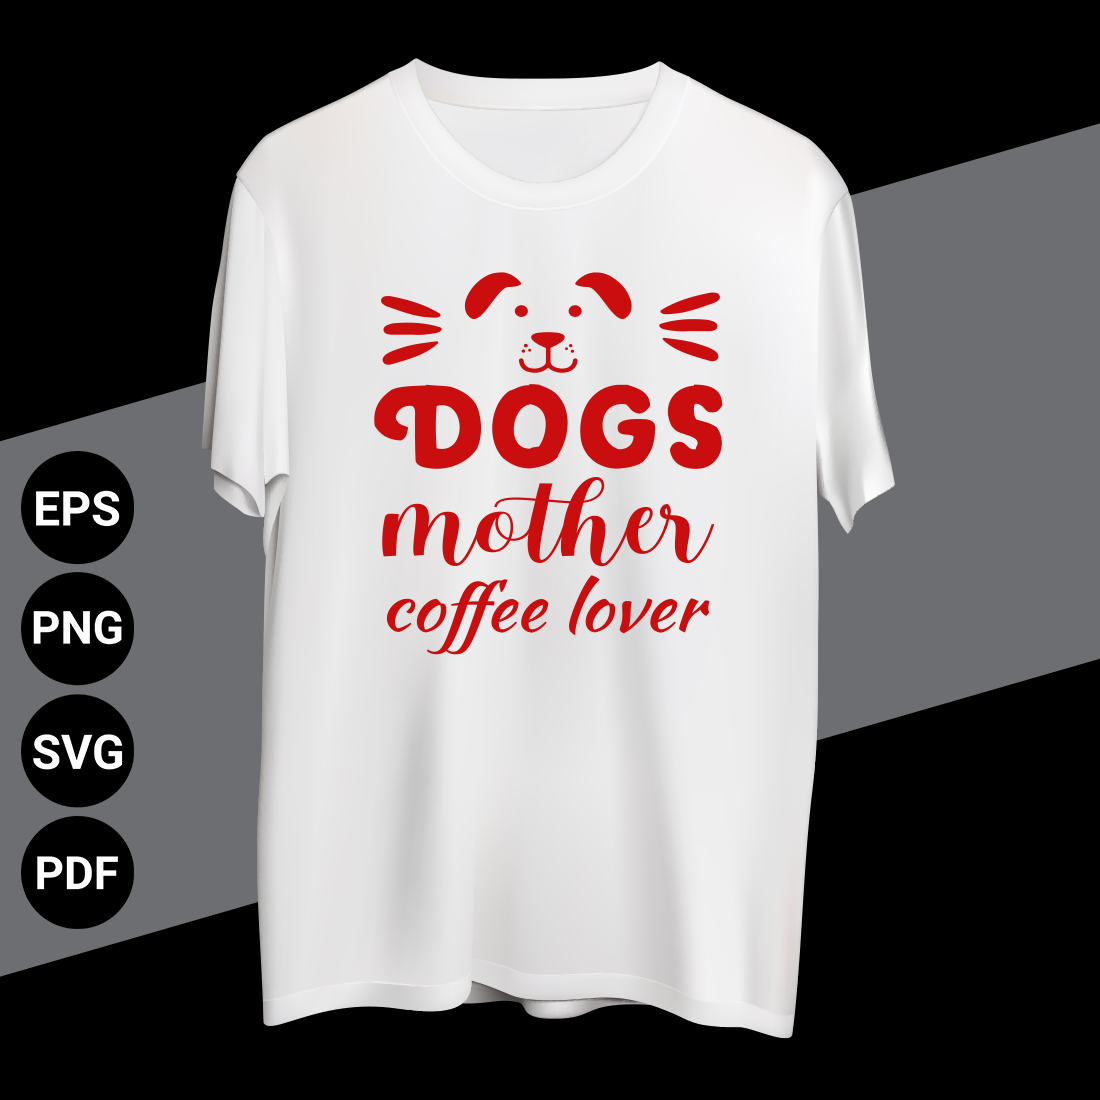 Dog books and coffee T-shirt design preview image.